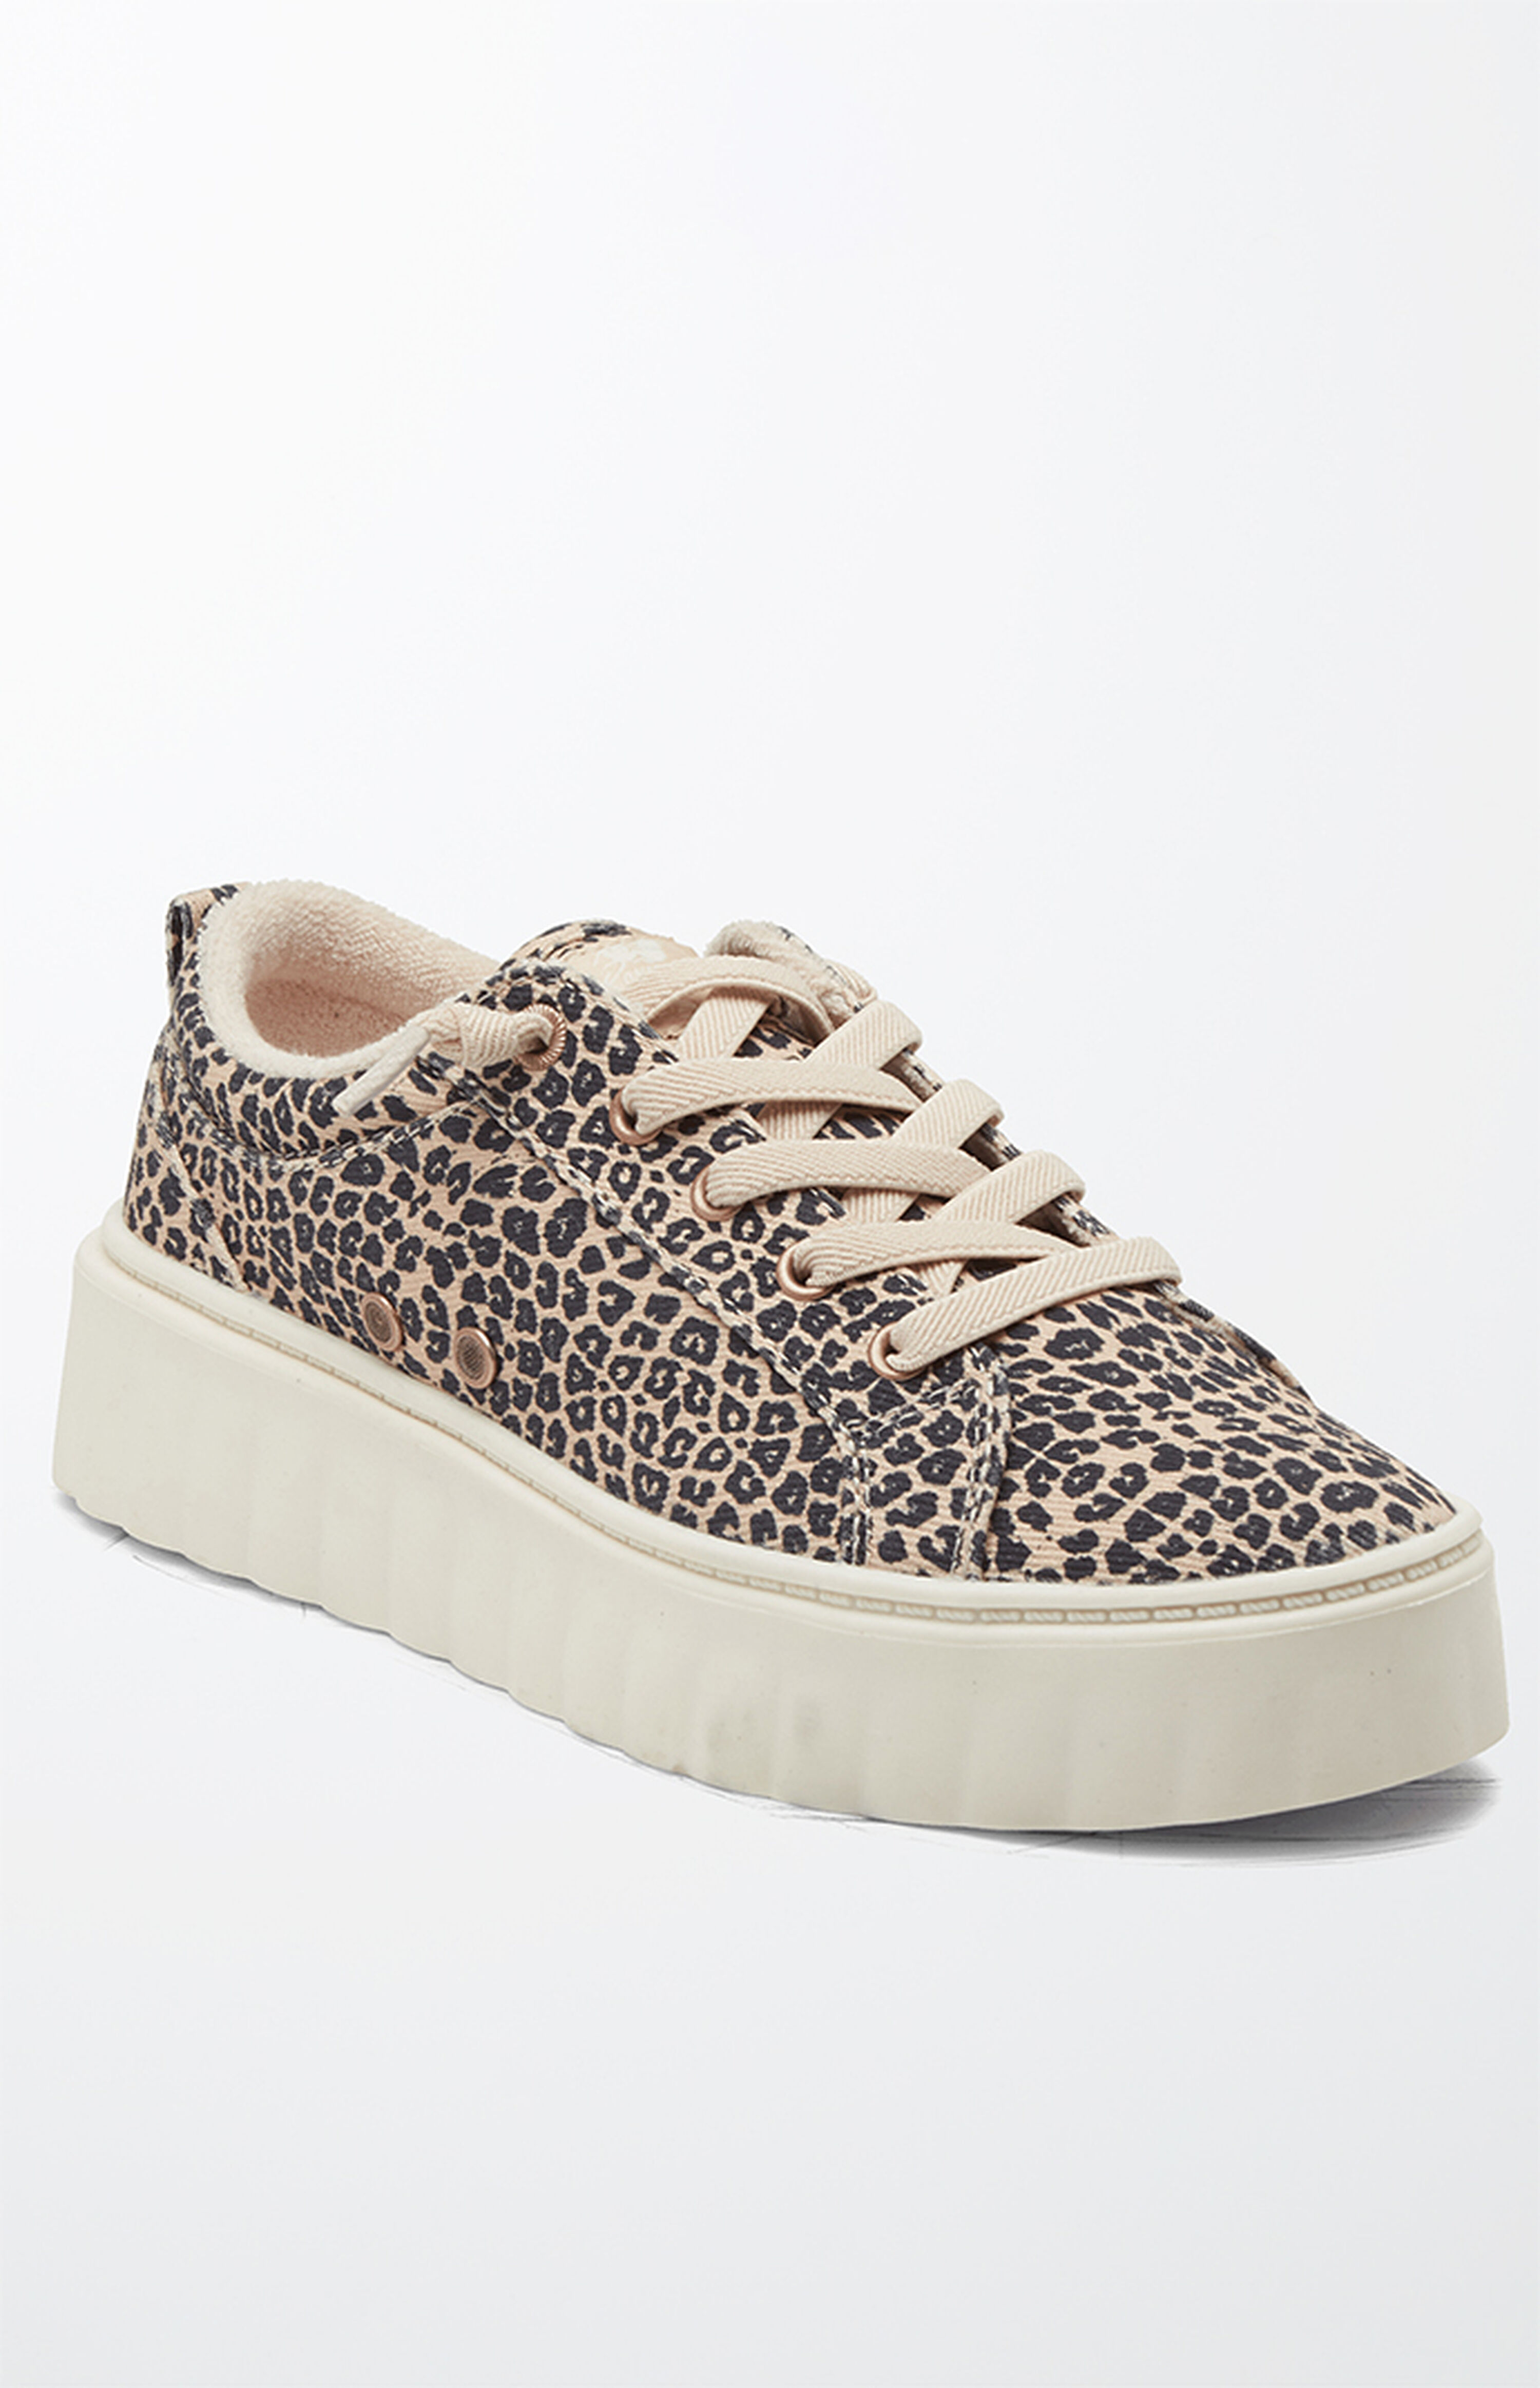 Sneakers for Women | PacSun